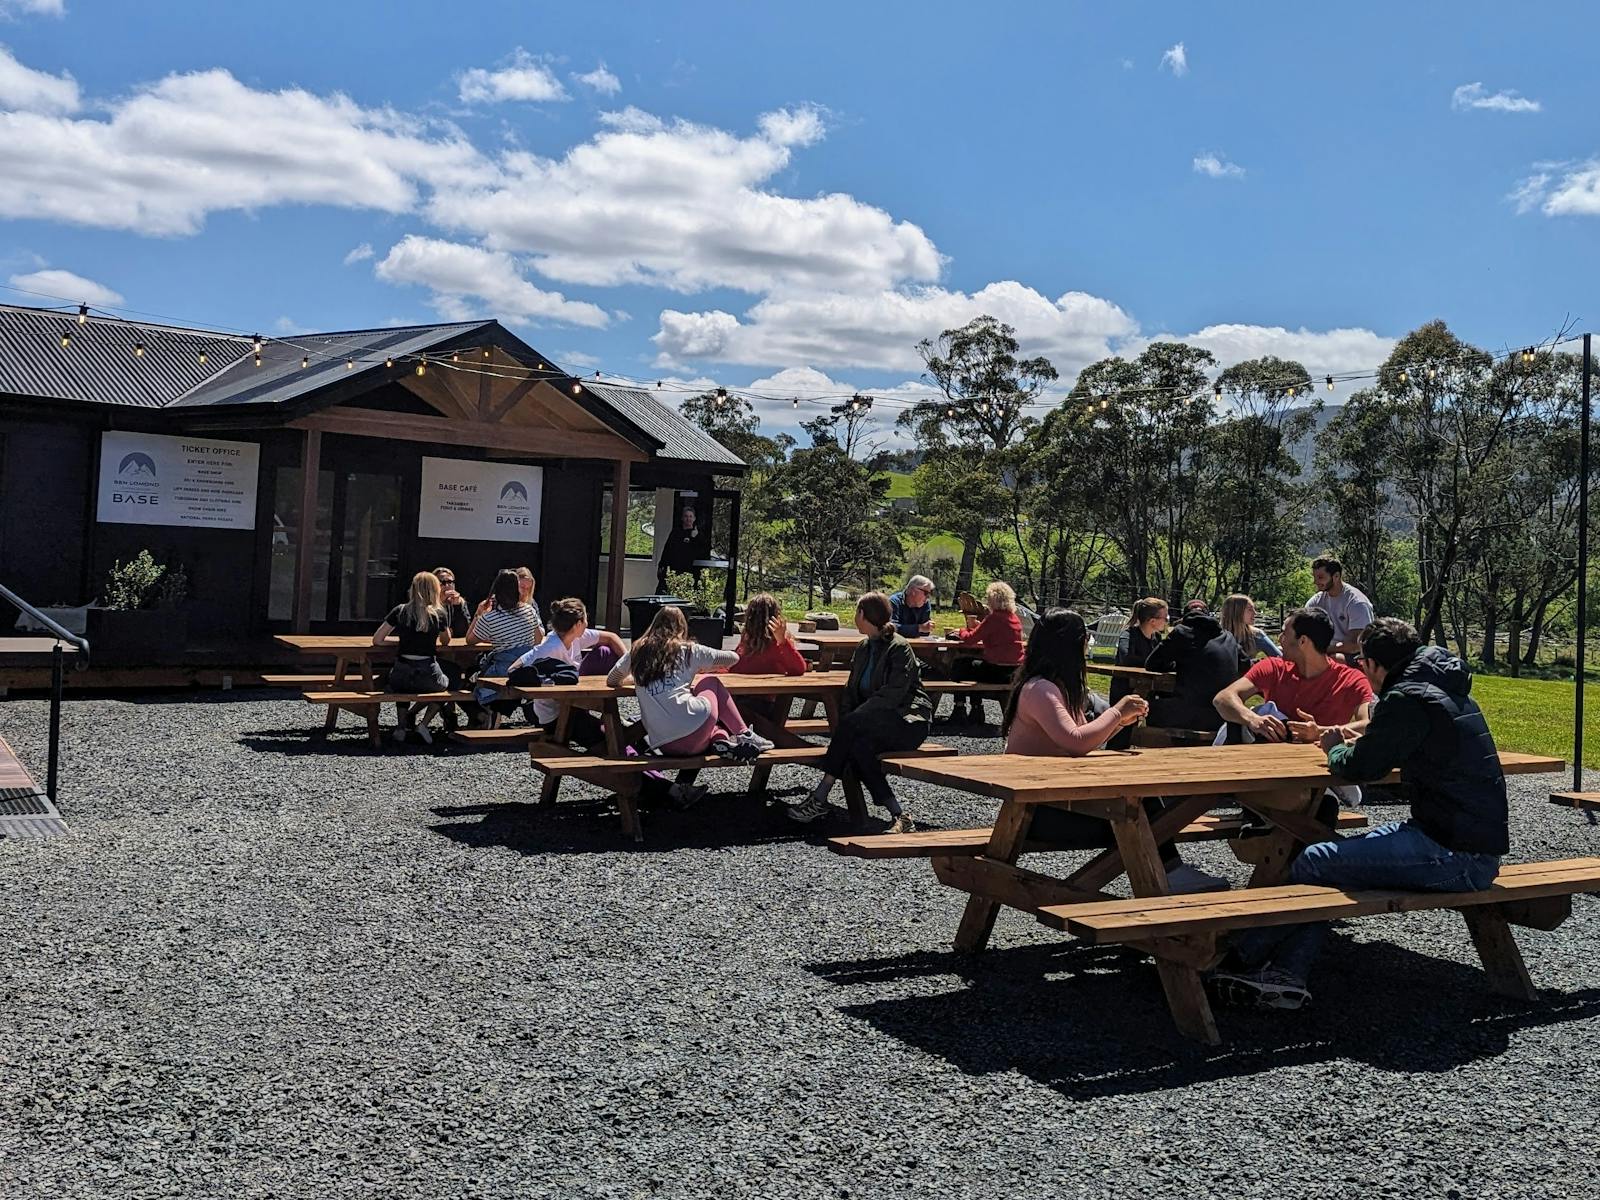 Groups sat on picnic benches outside a cafe